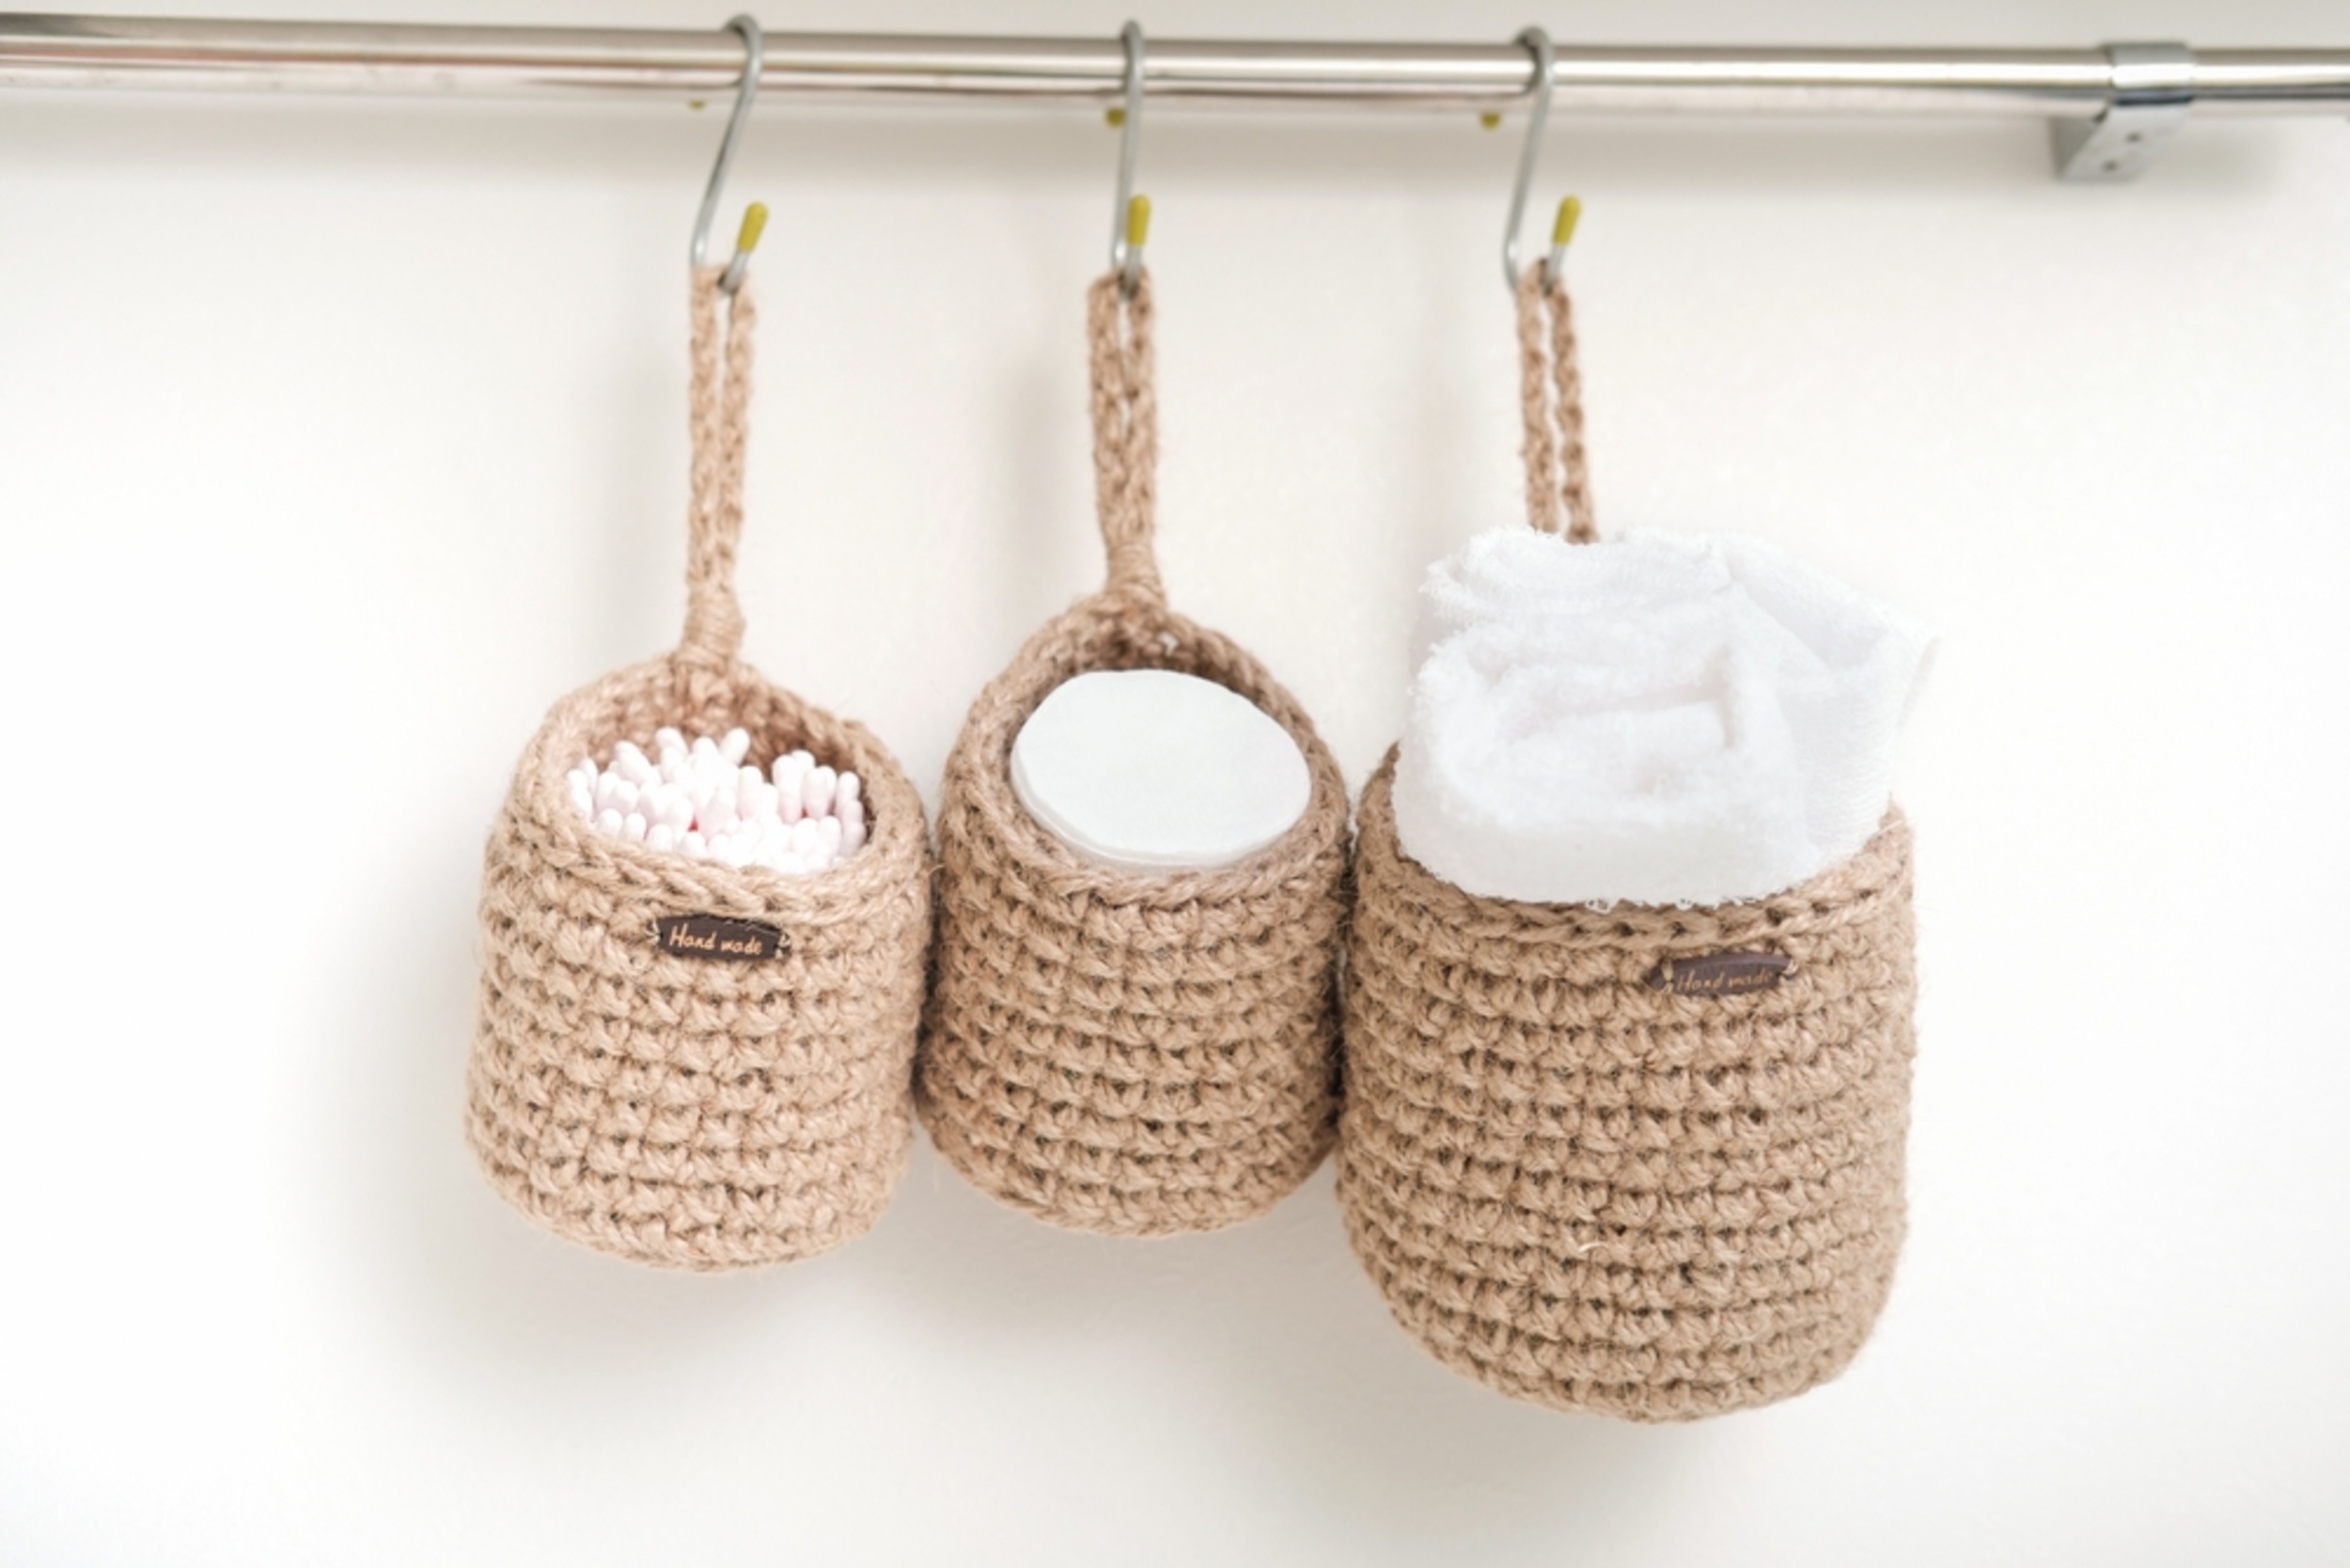 <p>Whether they're wicker or wire, round or square, baskets are endlessly versatile. If you're in need of a place to store towels in the bathroom or kids' toys in the playroom, hang a basket on the wall for an easy shelving solution that doesn't require hardly any work at all. </p><p>You may also like: <a href='https://www.yardbarker.com/lifestyle/articles/20_foolproof_crockpot_dump_recipes_you_can_try_110823/s1__39117815'>20 foolproof crockpot dump recipes you can try</a></p>